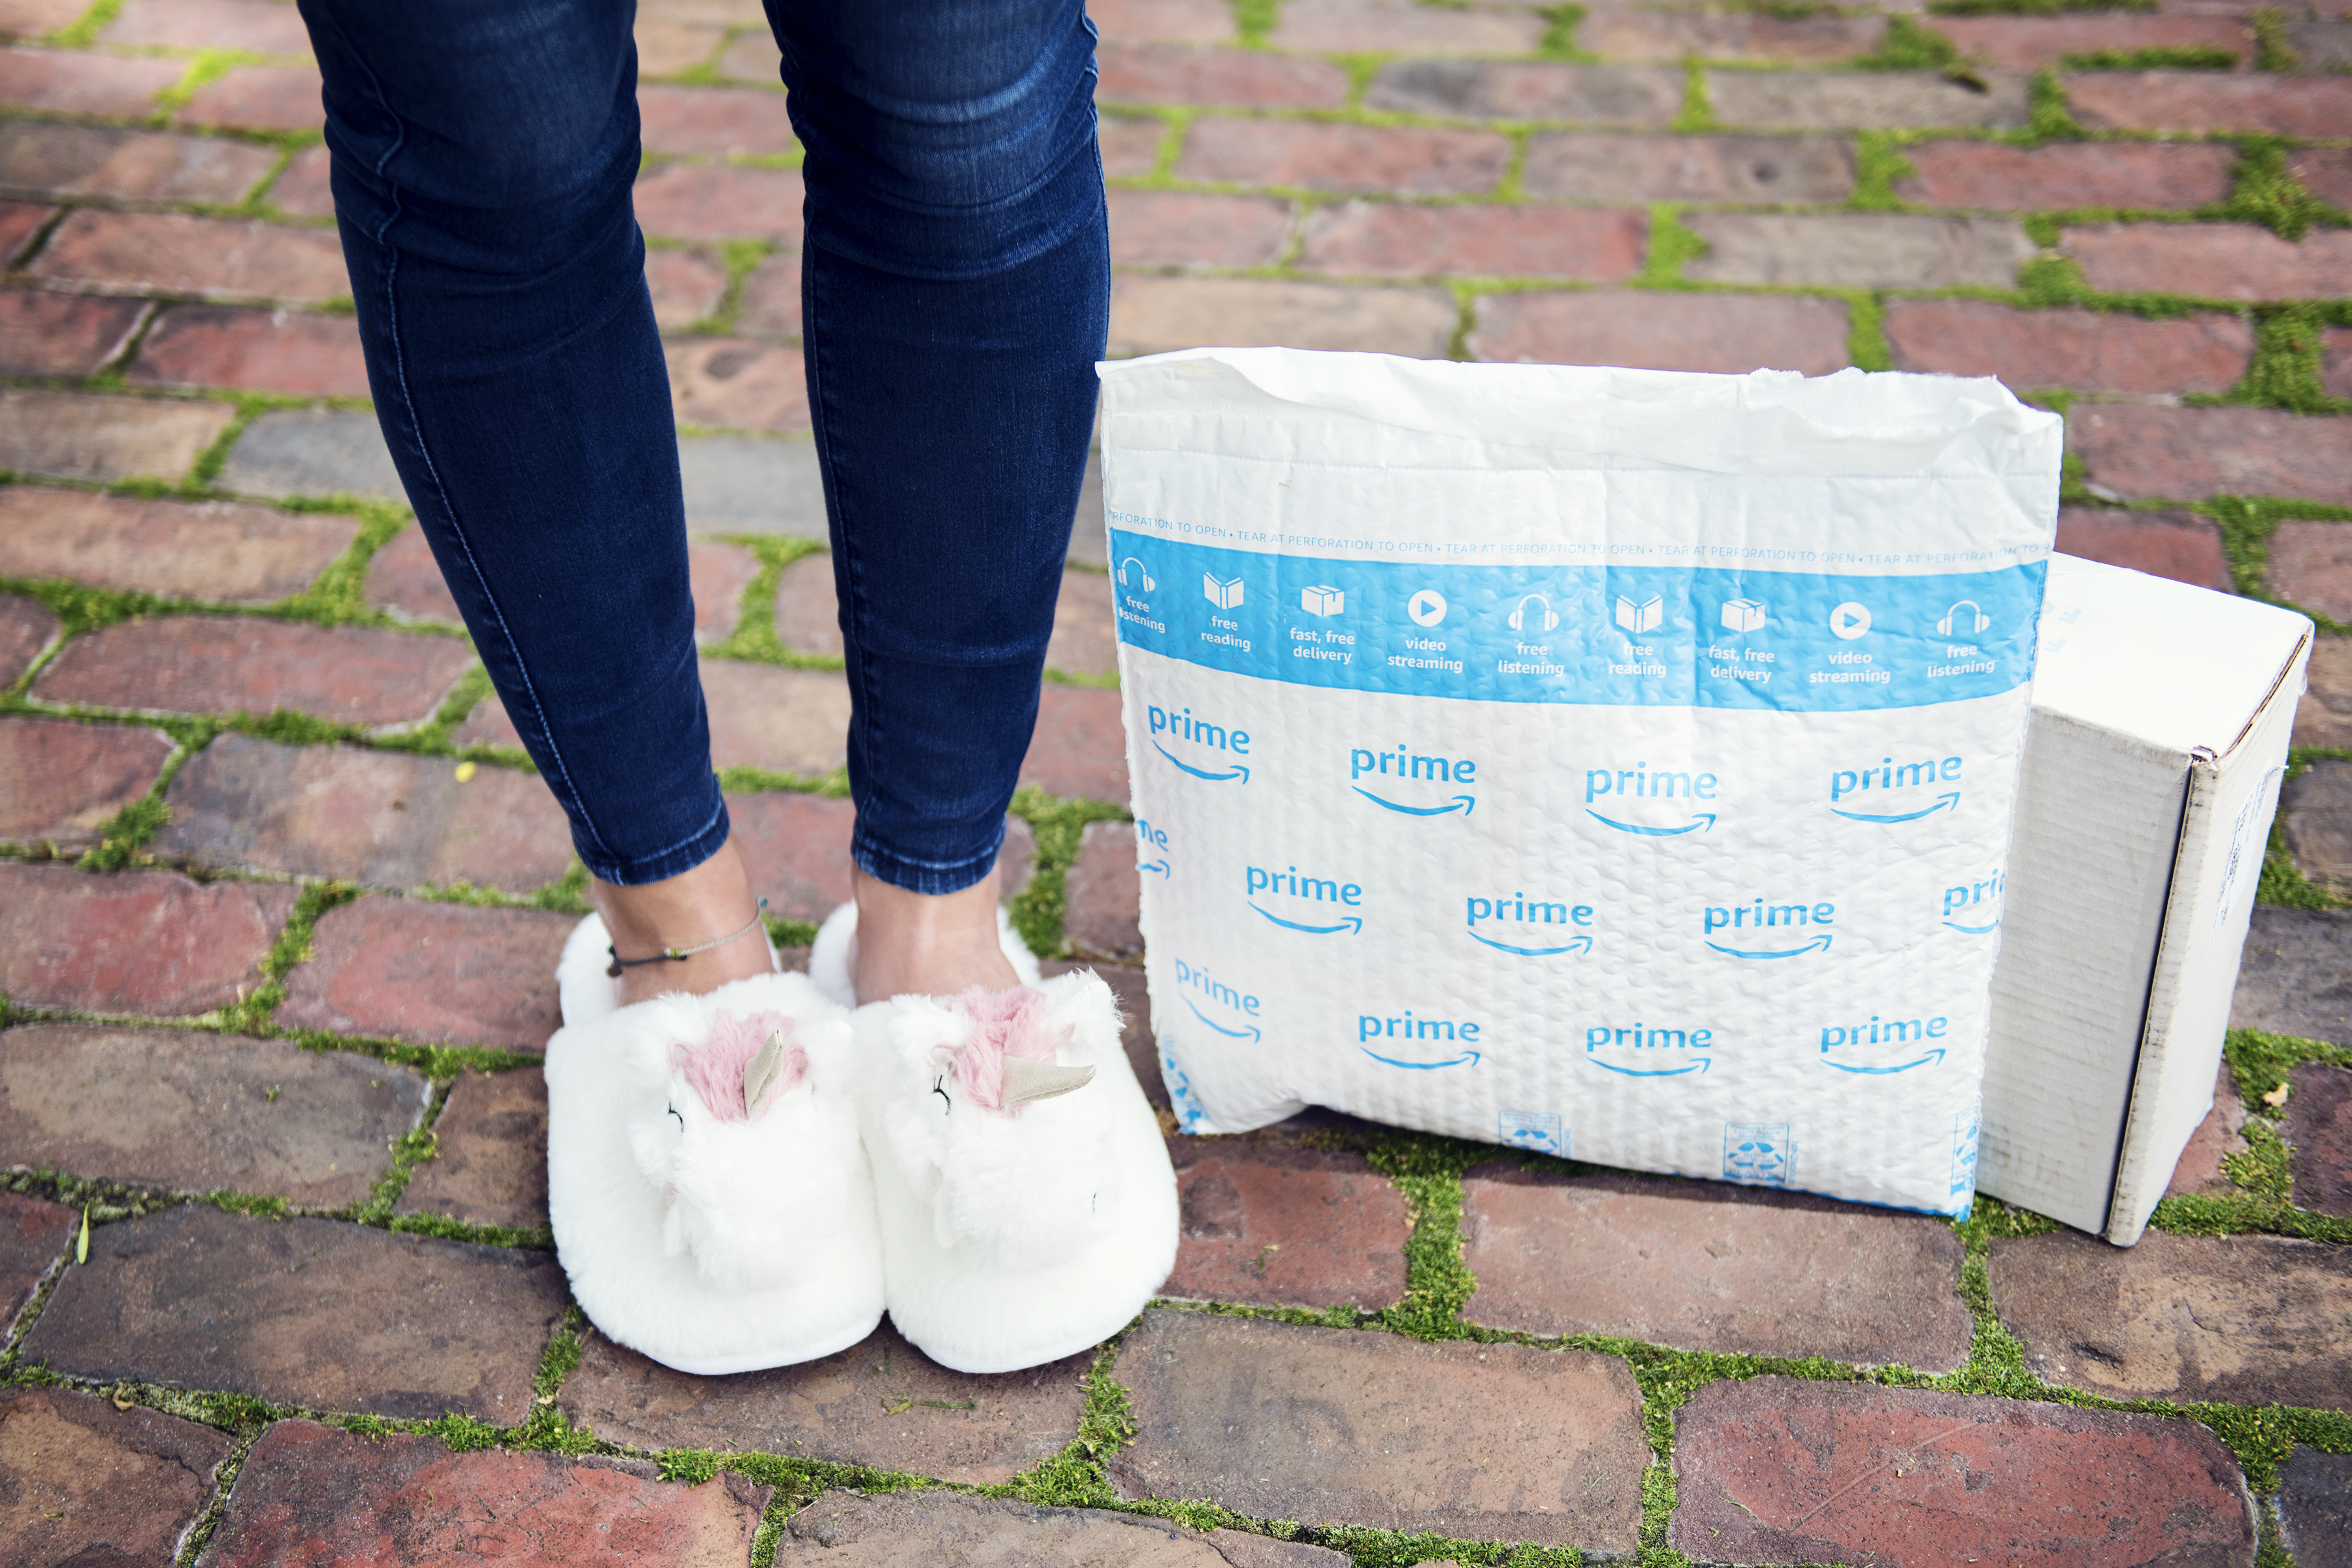 win a membership just in time for amazon prime day - Collin in unicorn slippers